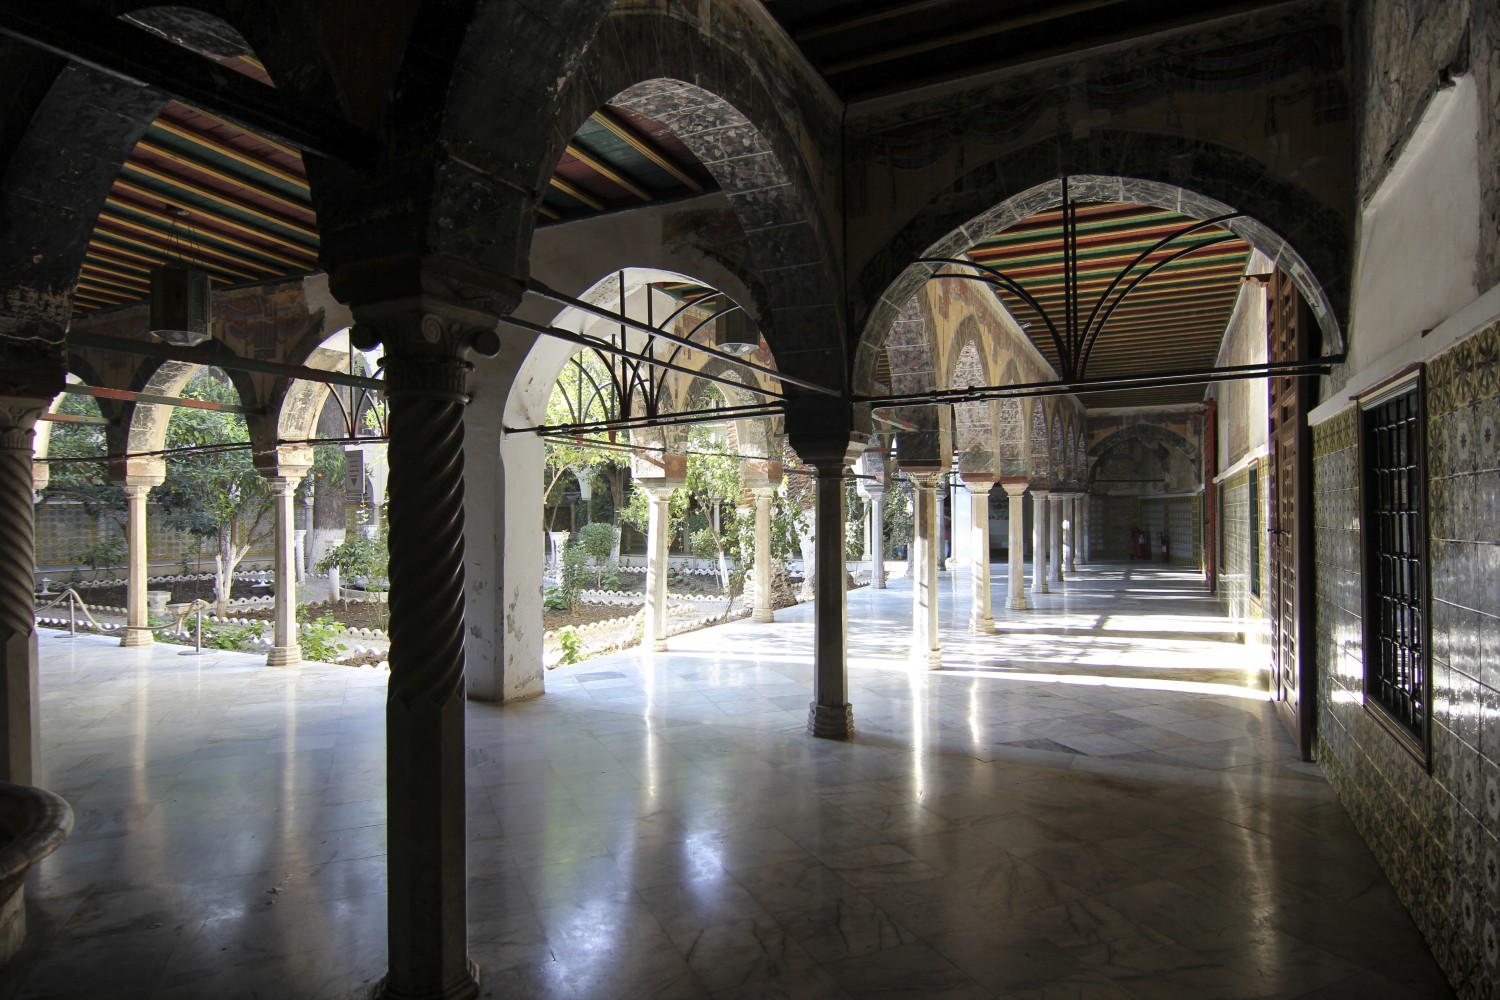 Orange trees garden, view of north and east galleries showing wreathed and octagonal columns, and frescos on the arches